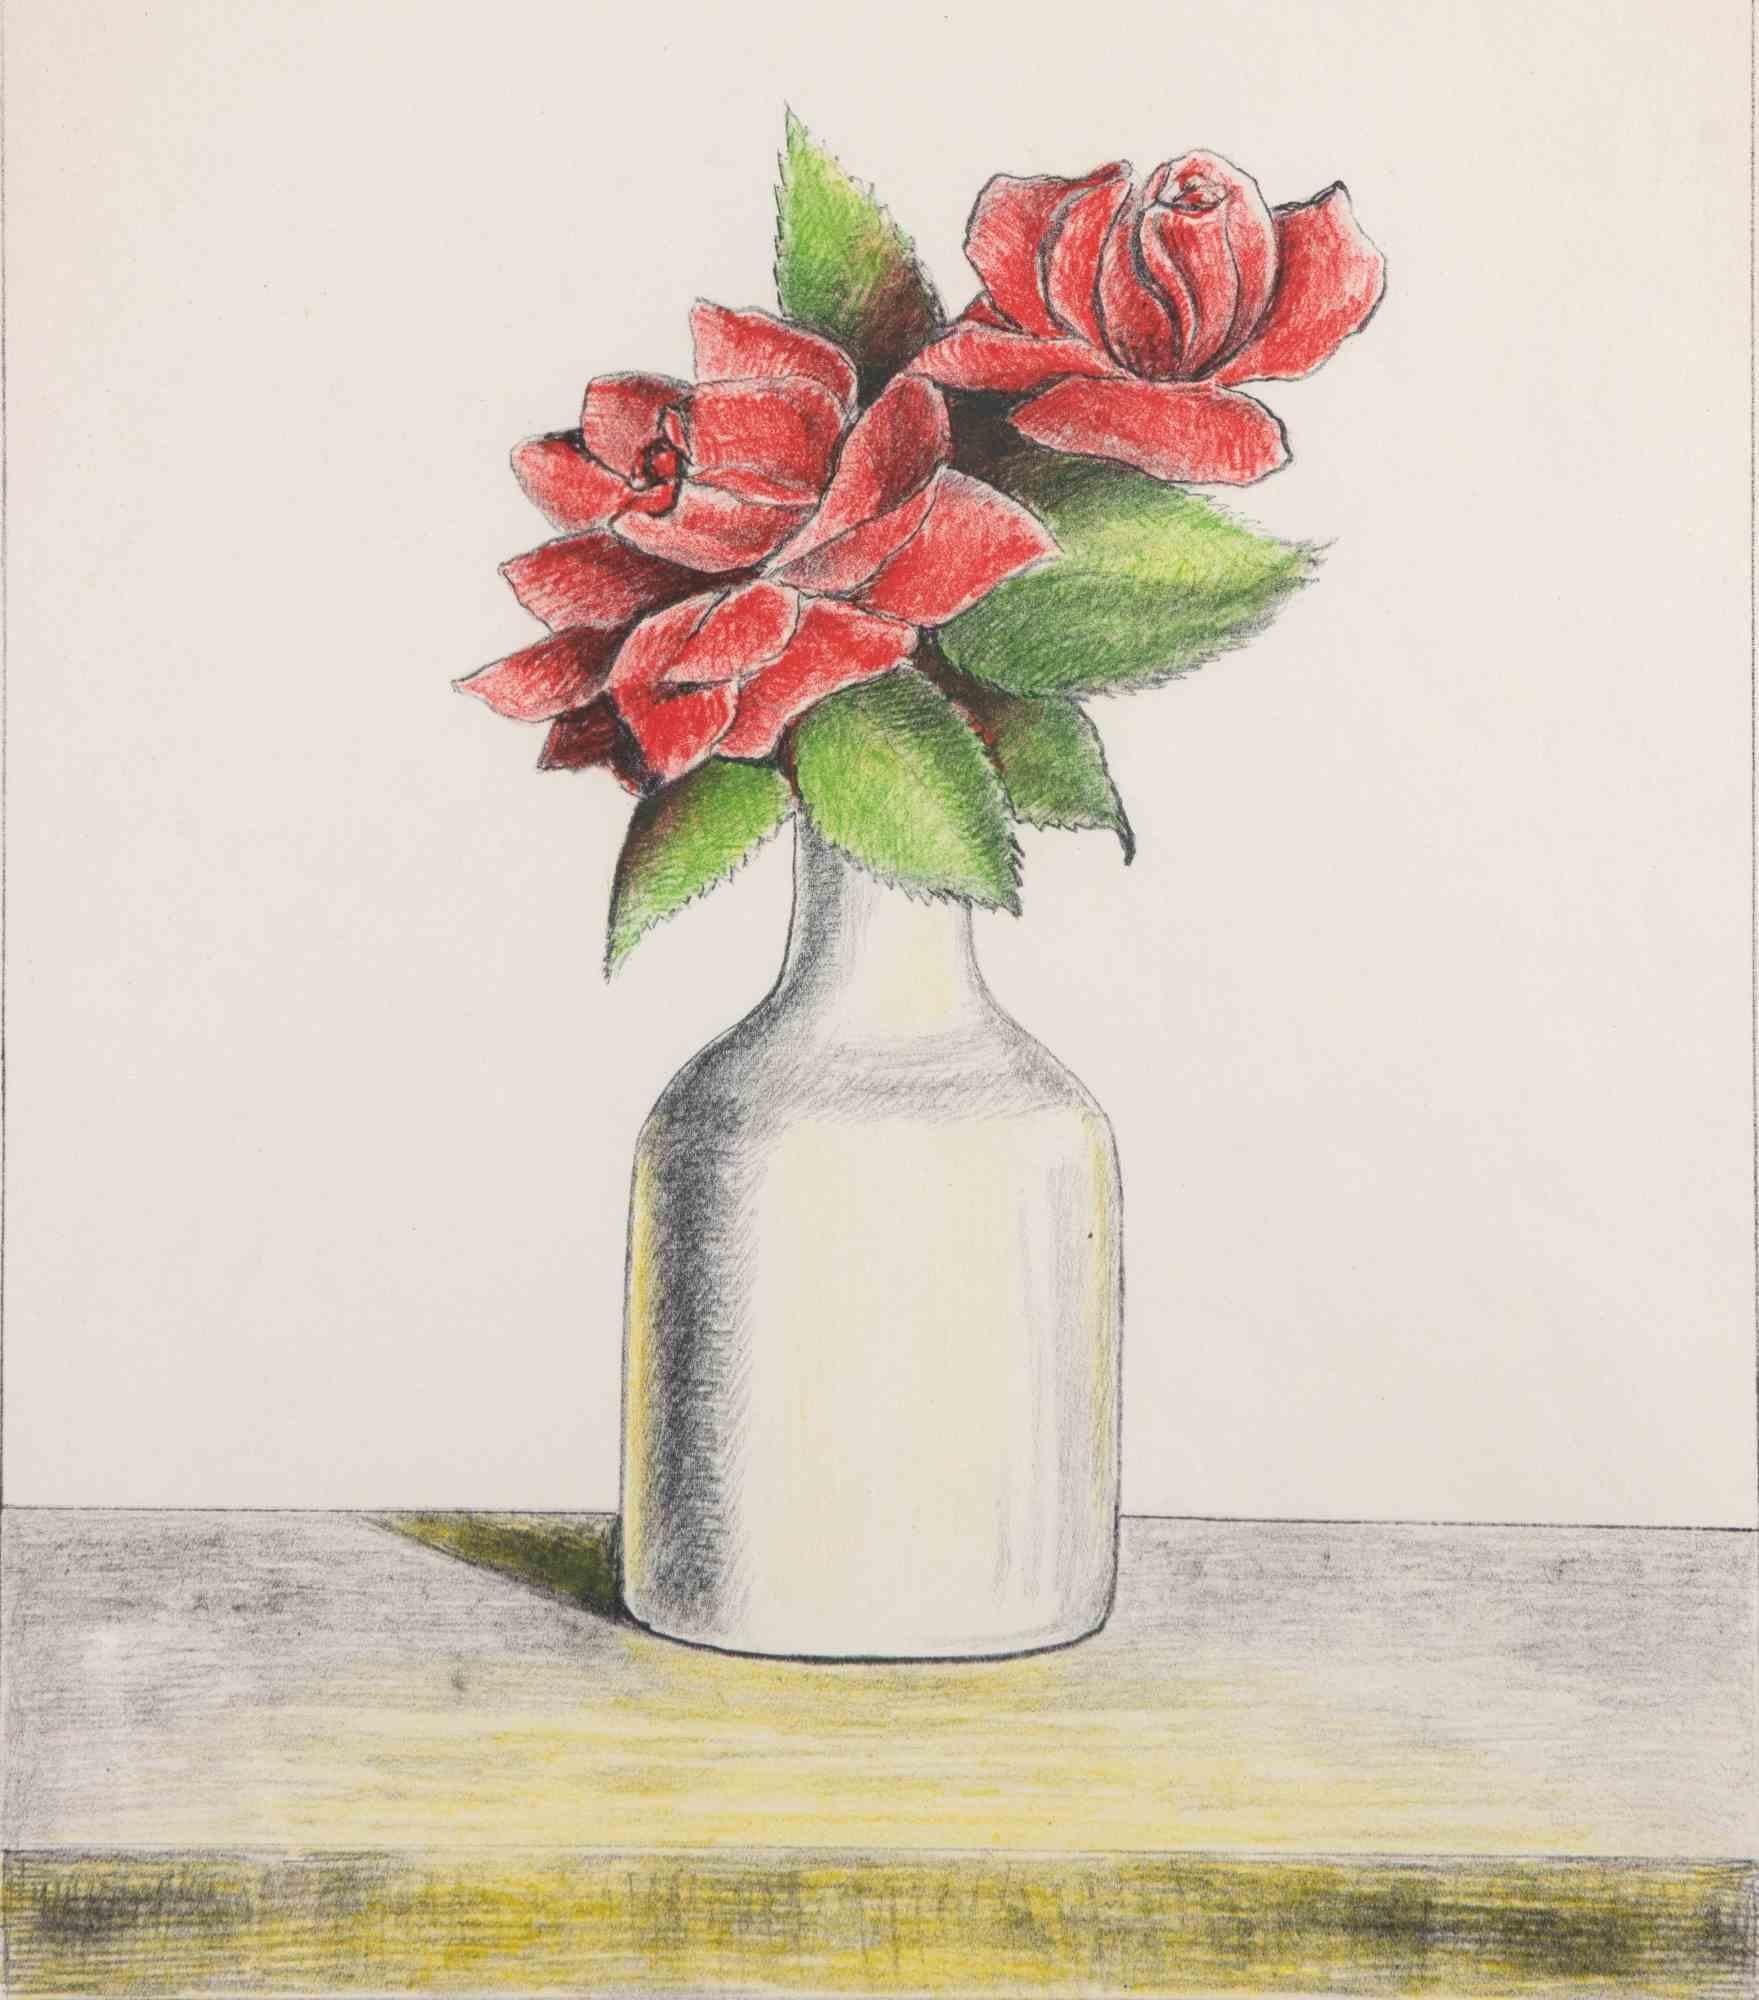 Vase of Flower - Lithograph by Fabio Failla - 1969 For Sale 1